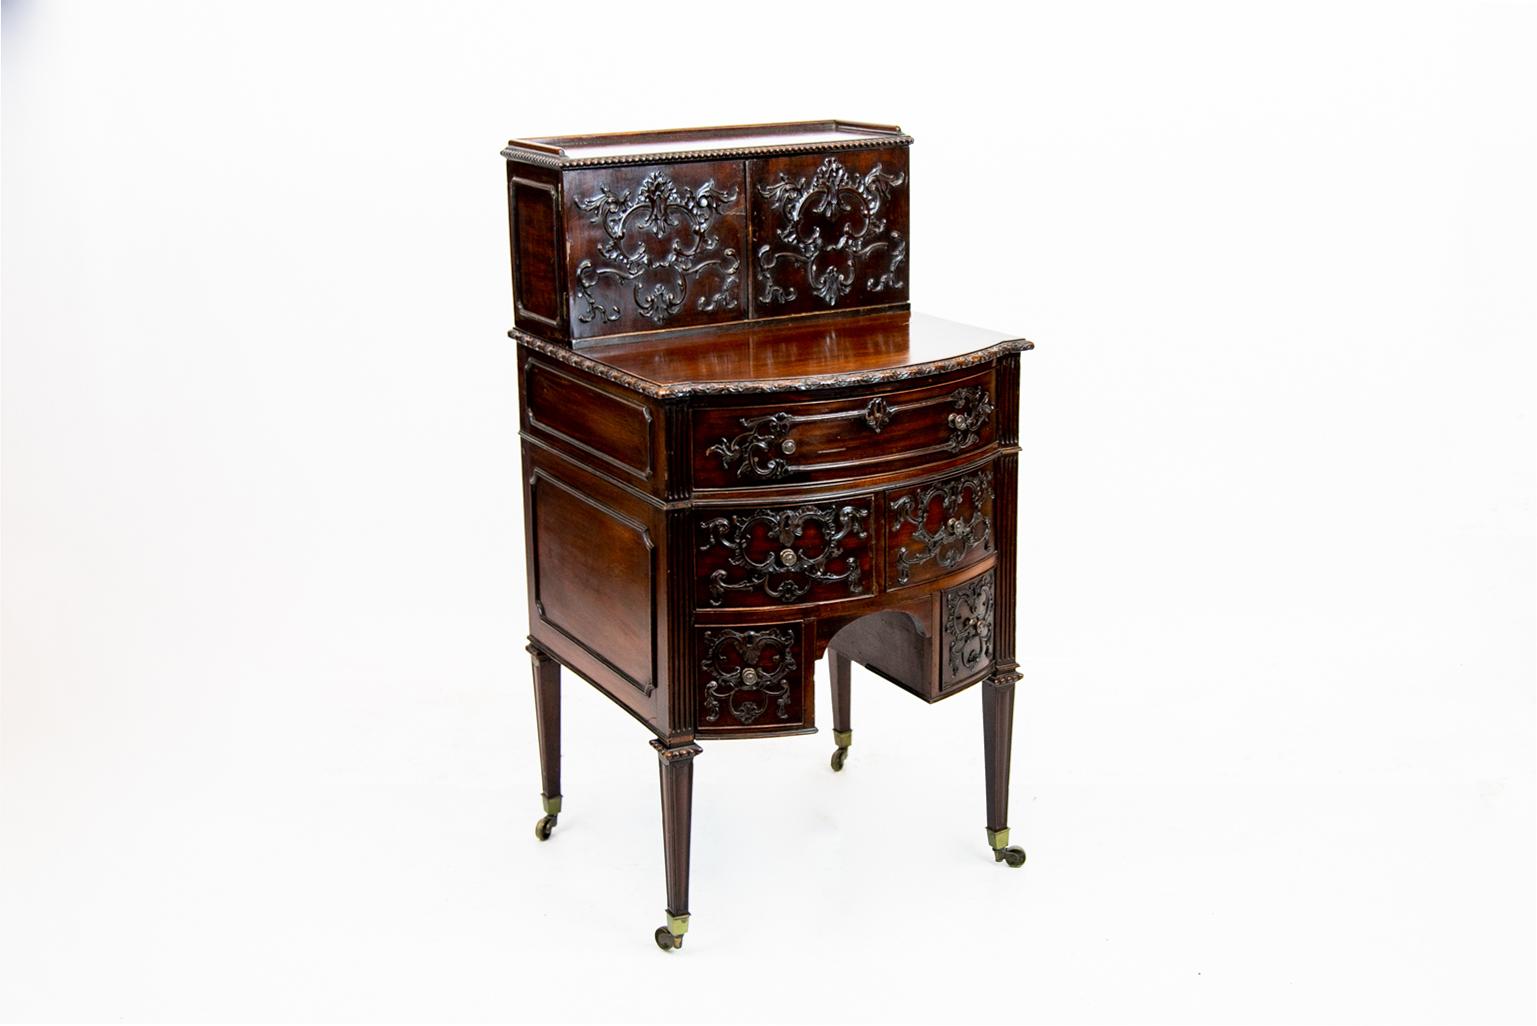 Carved English mahogany Hepplewhite bow front desk on legs. Top section with Rococo carvings, gadrooned top edges, and a shallow gallery. Two interior drawers with divisions. Bottom section has five drawers with Rococo carvings and fluted stiles,